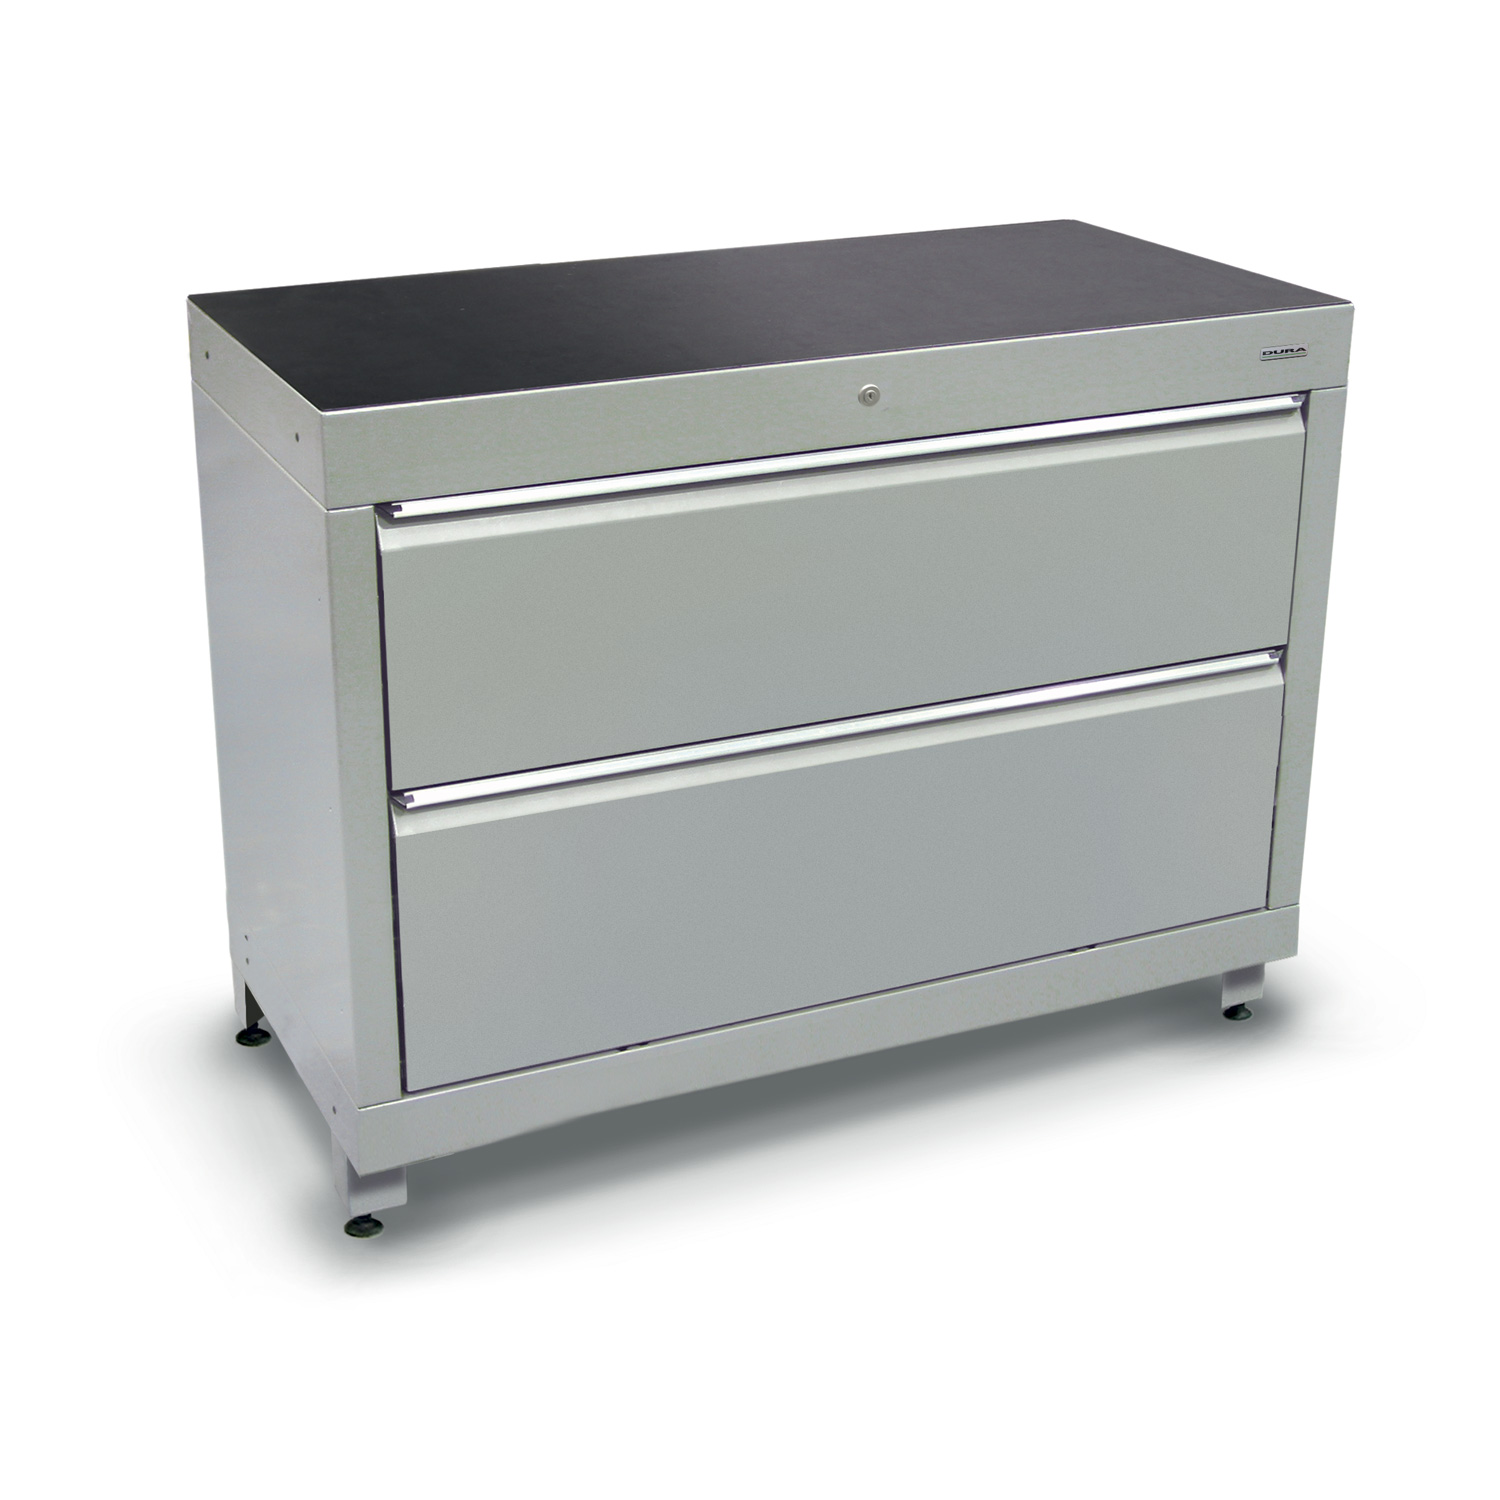 1200mm tool storage cabinet with 2 extra deep drawers.